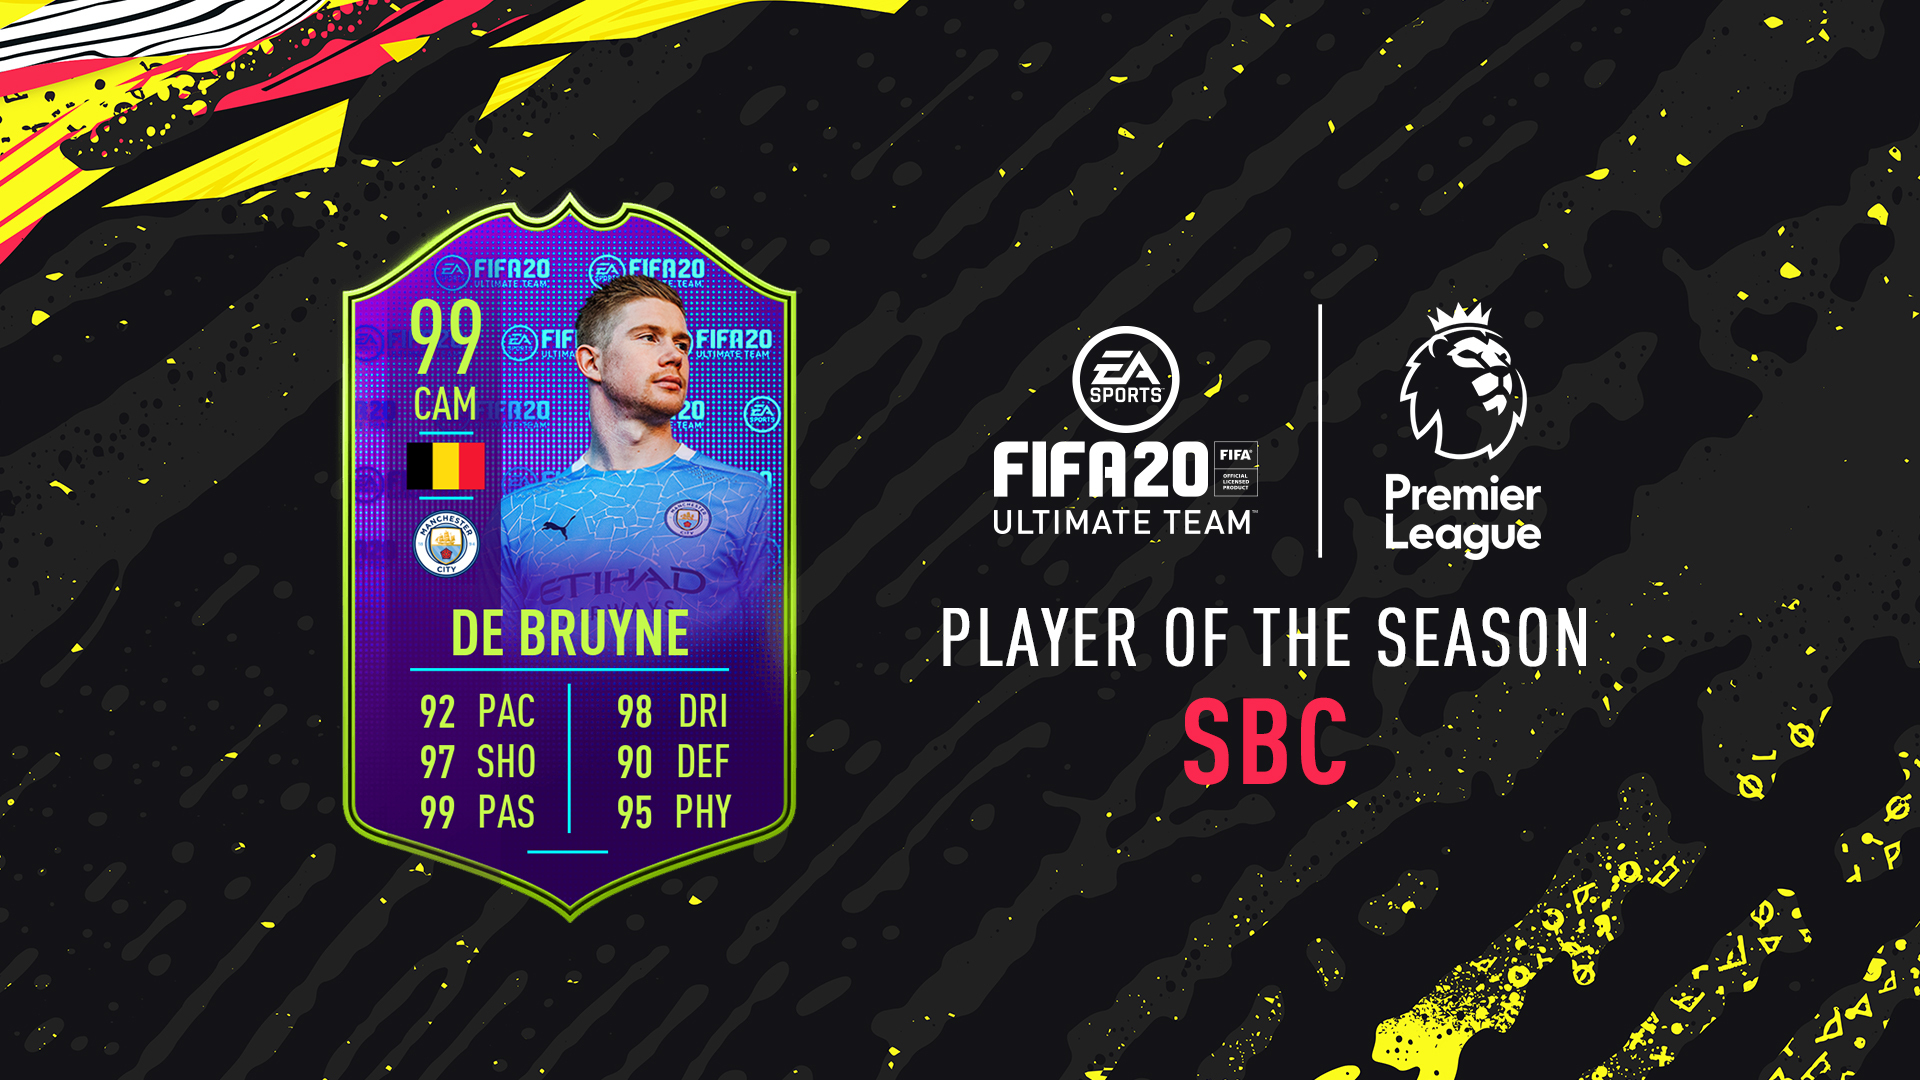 How To Complete Award Winner De Bruyne Sbc In Fifa 20 Ultimate Team Dot Esports